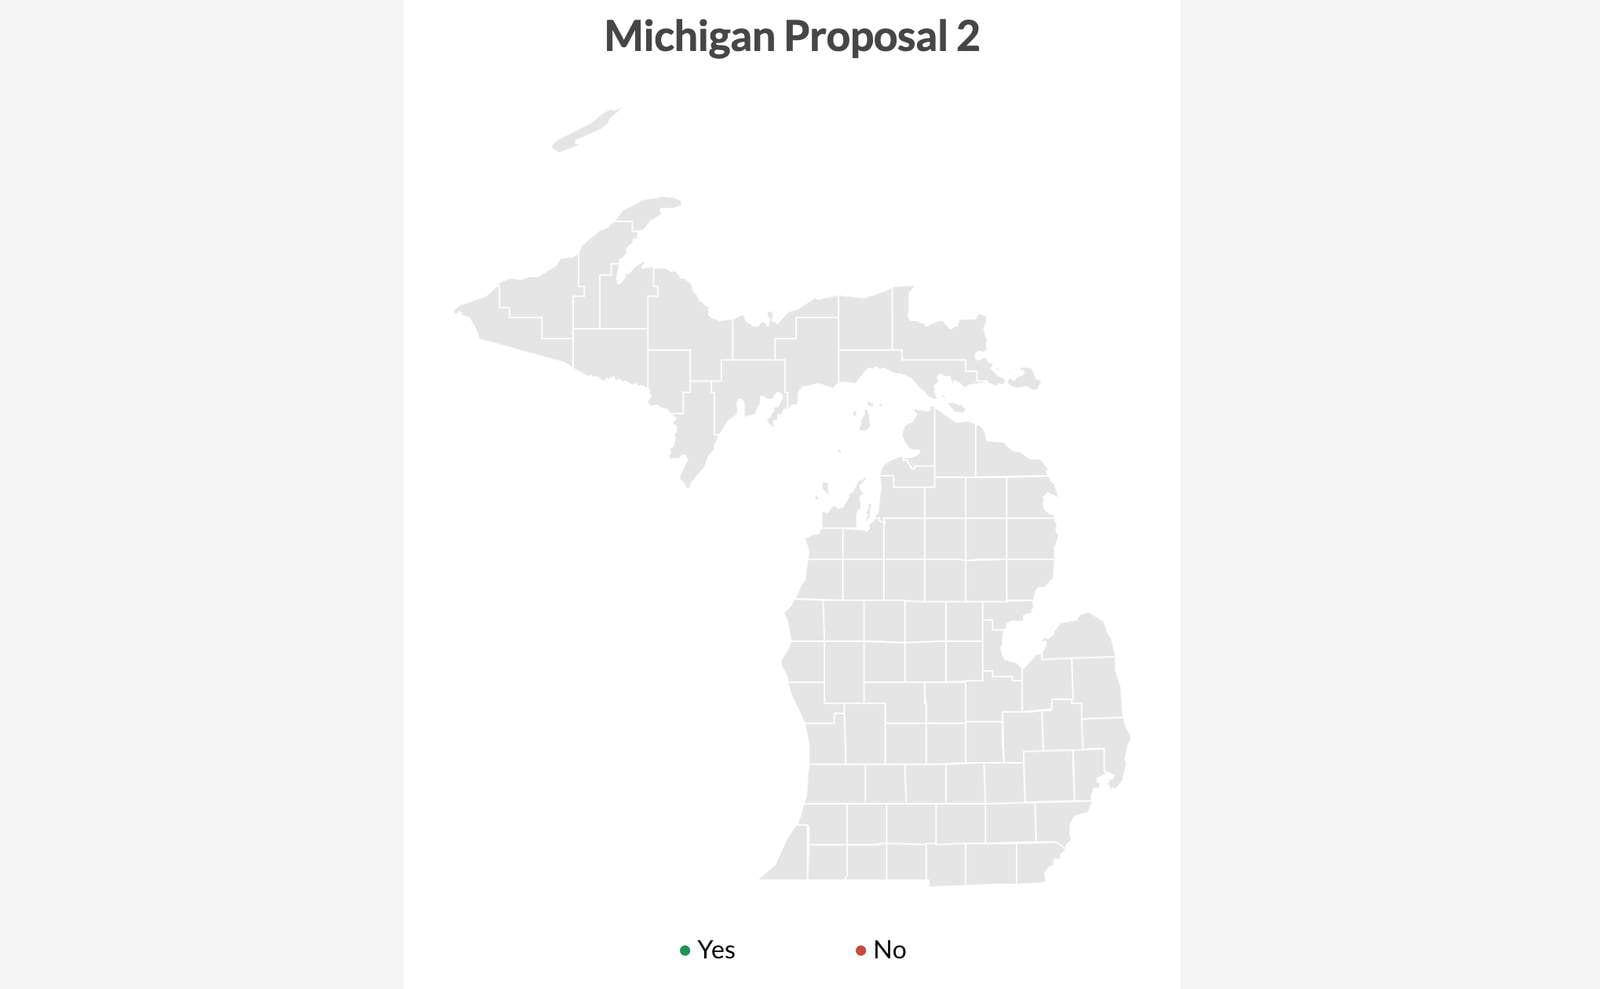 2020 election results: Michigan Proposal 2 outcome mapped by county